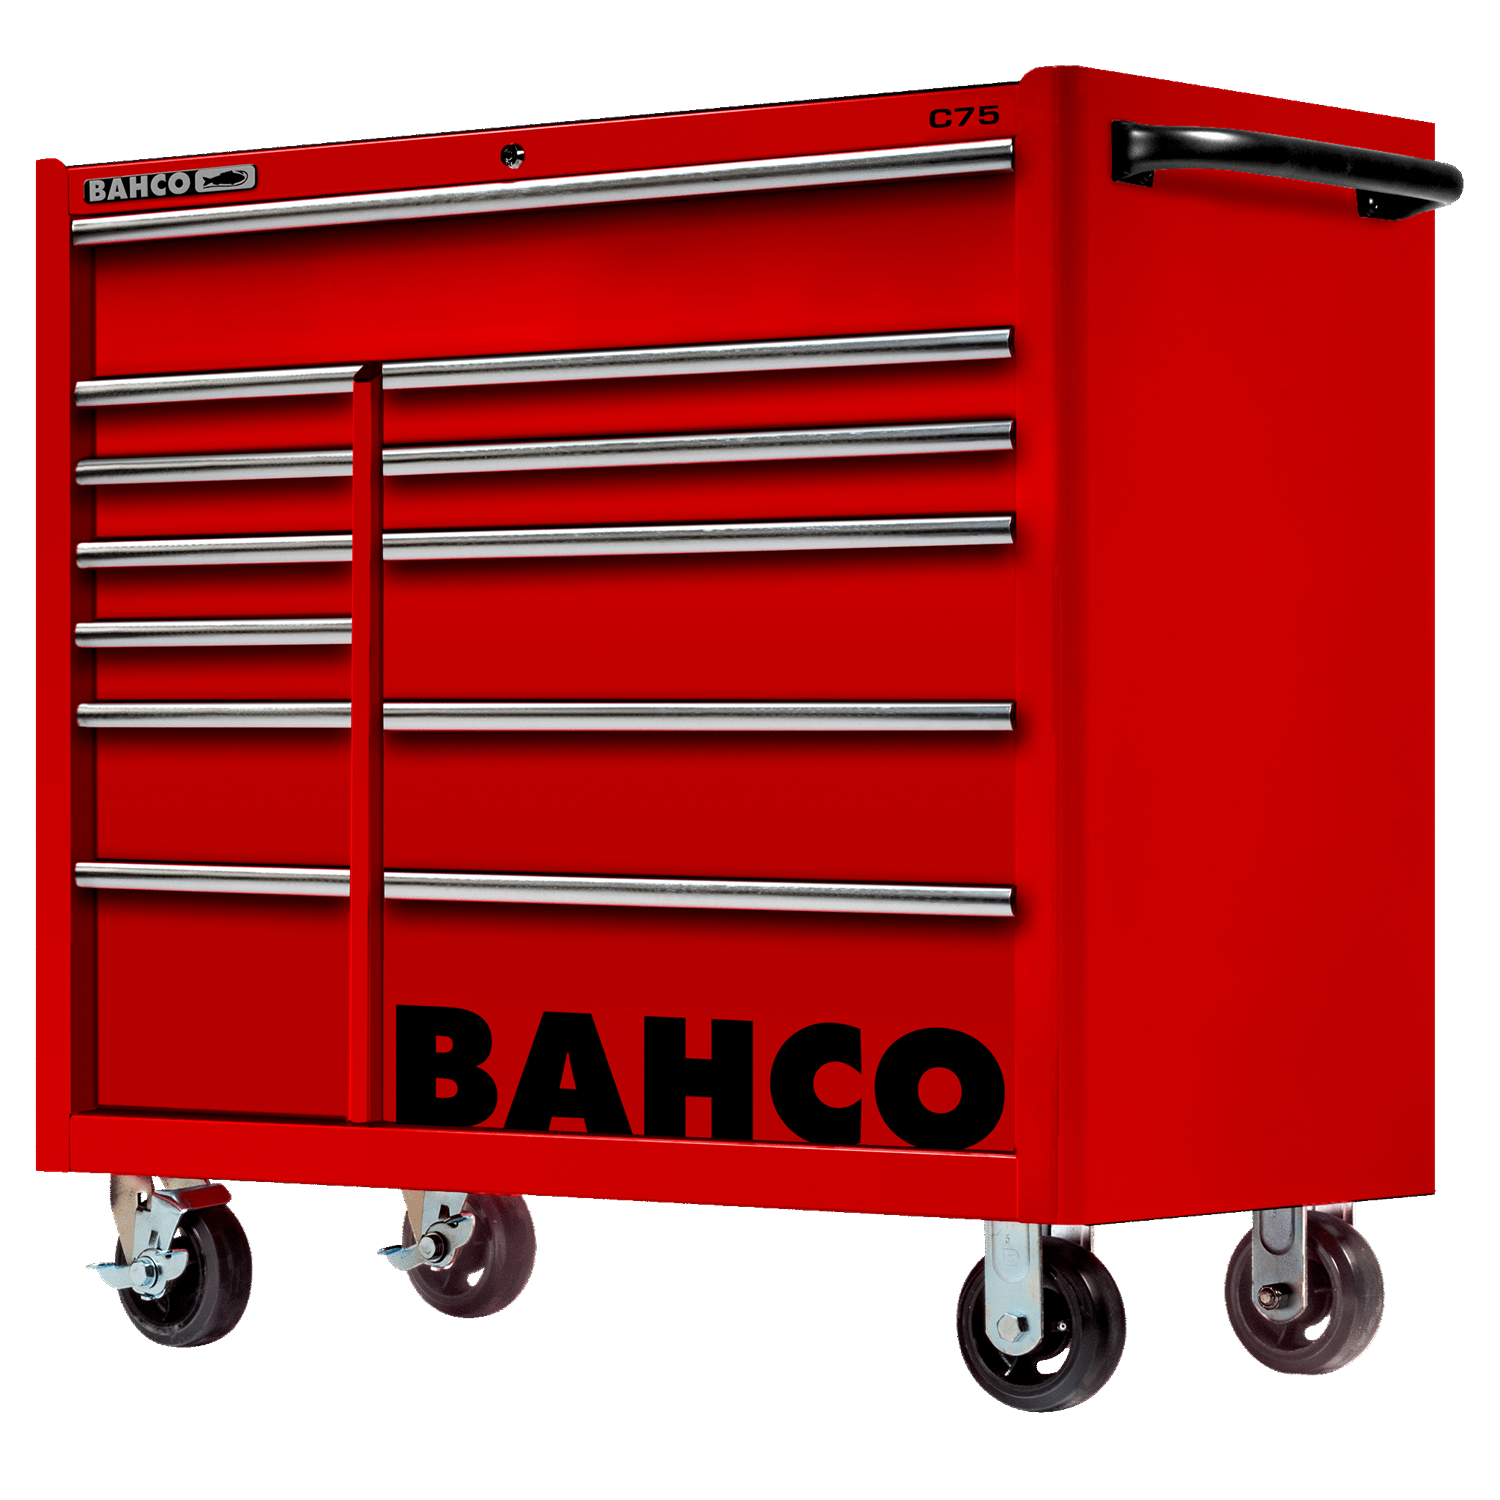 BAHCO 1475KXL12 40” Classic C75 Tool Trolleys with 12 Drawers - Premium Tool Trolley from BAHCO - Shop now at Yew Aik.